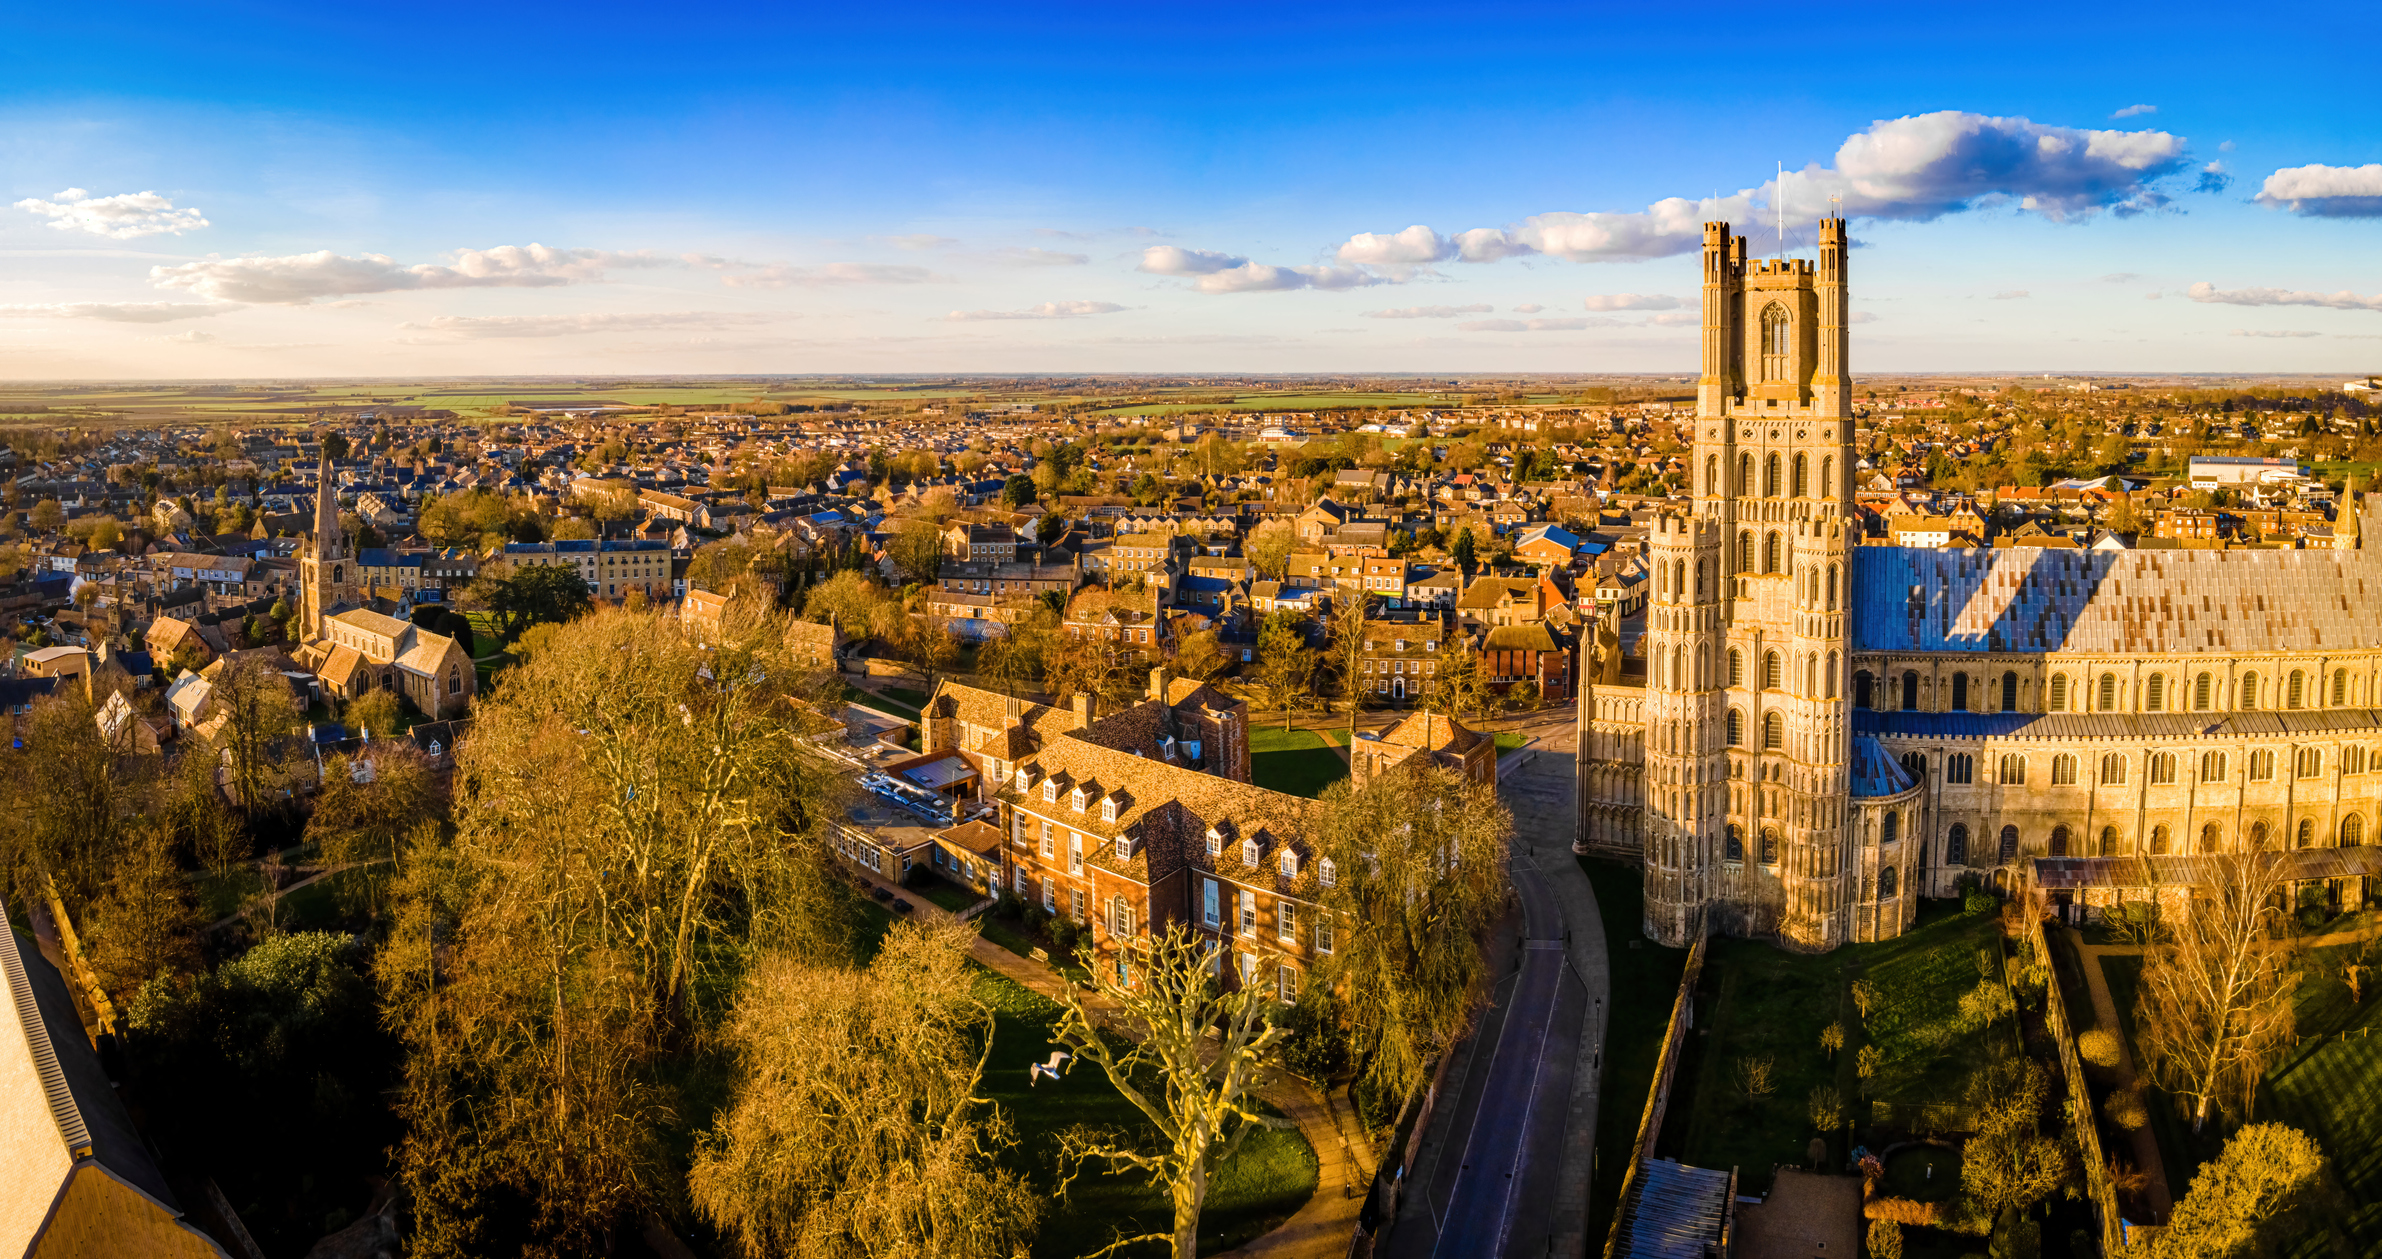 The aerial view of cathedral of Ely, a city in Cambridgeshire, England, UK